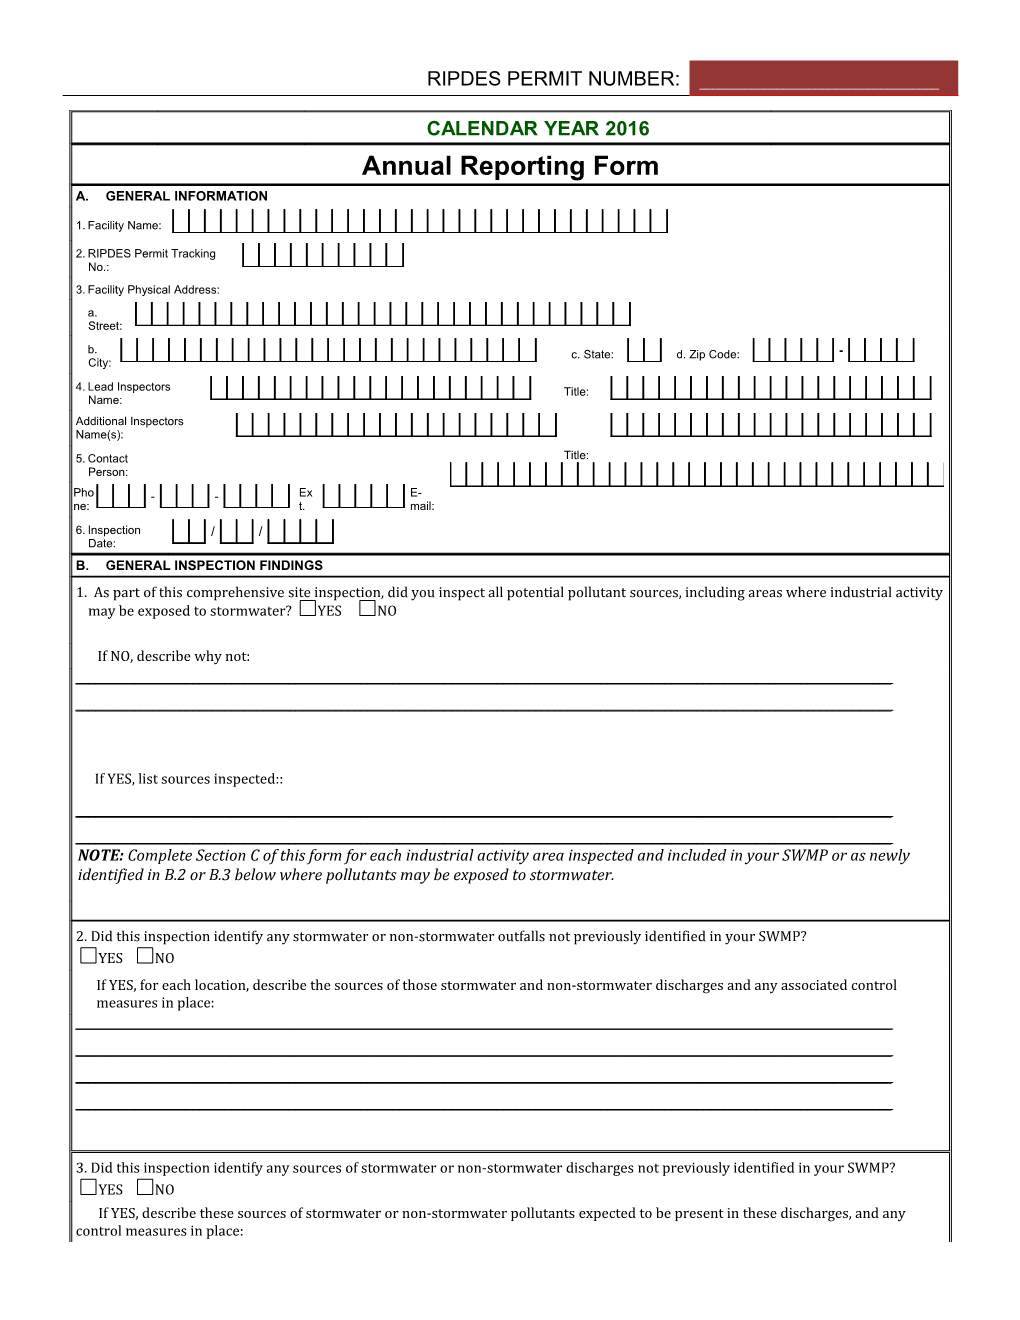 This Form Replaces Form 35109 (8-98)Refer to the Following Pages for Instructions